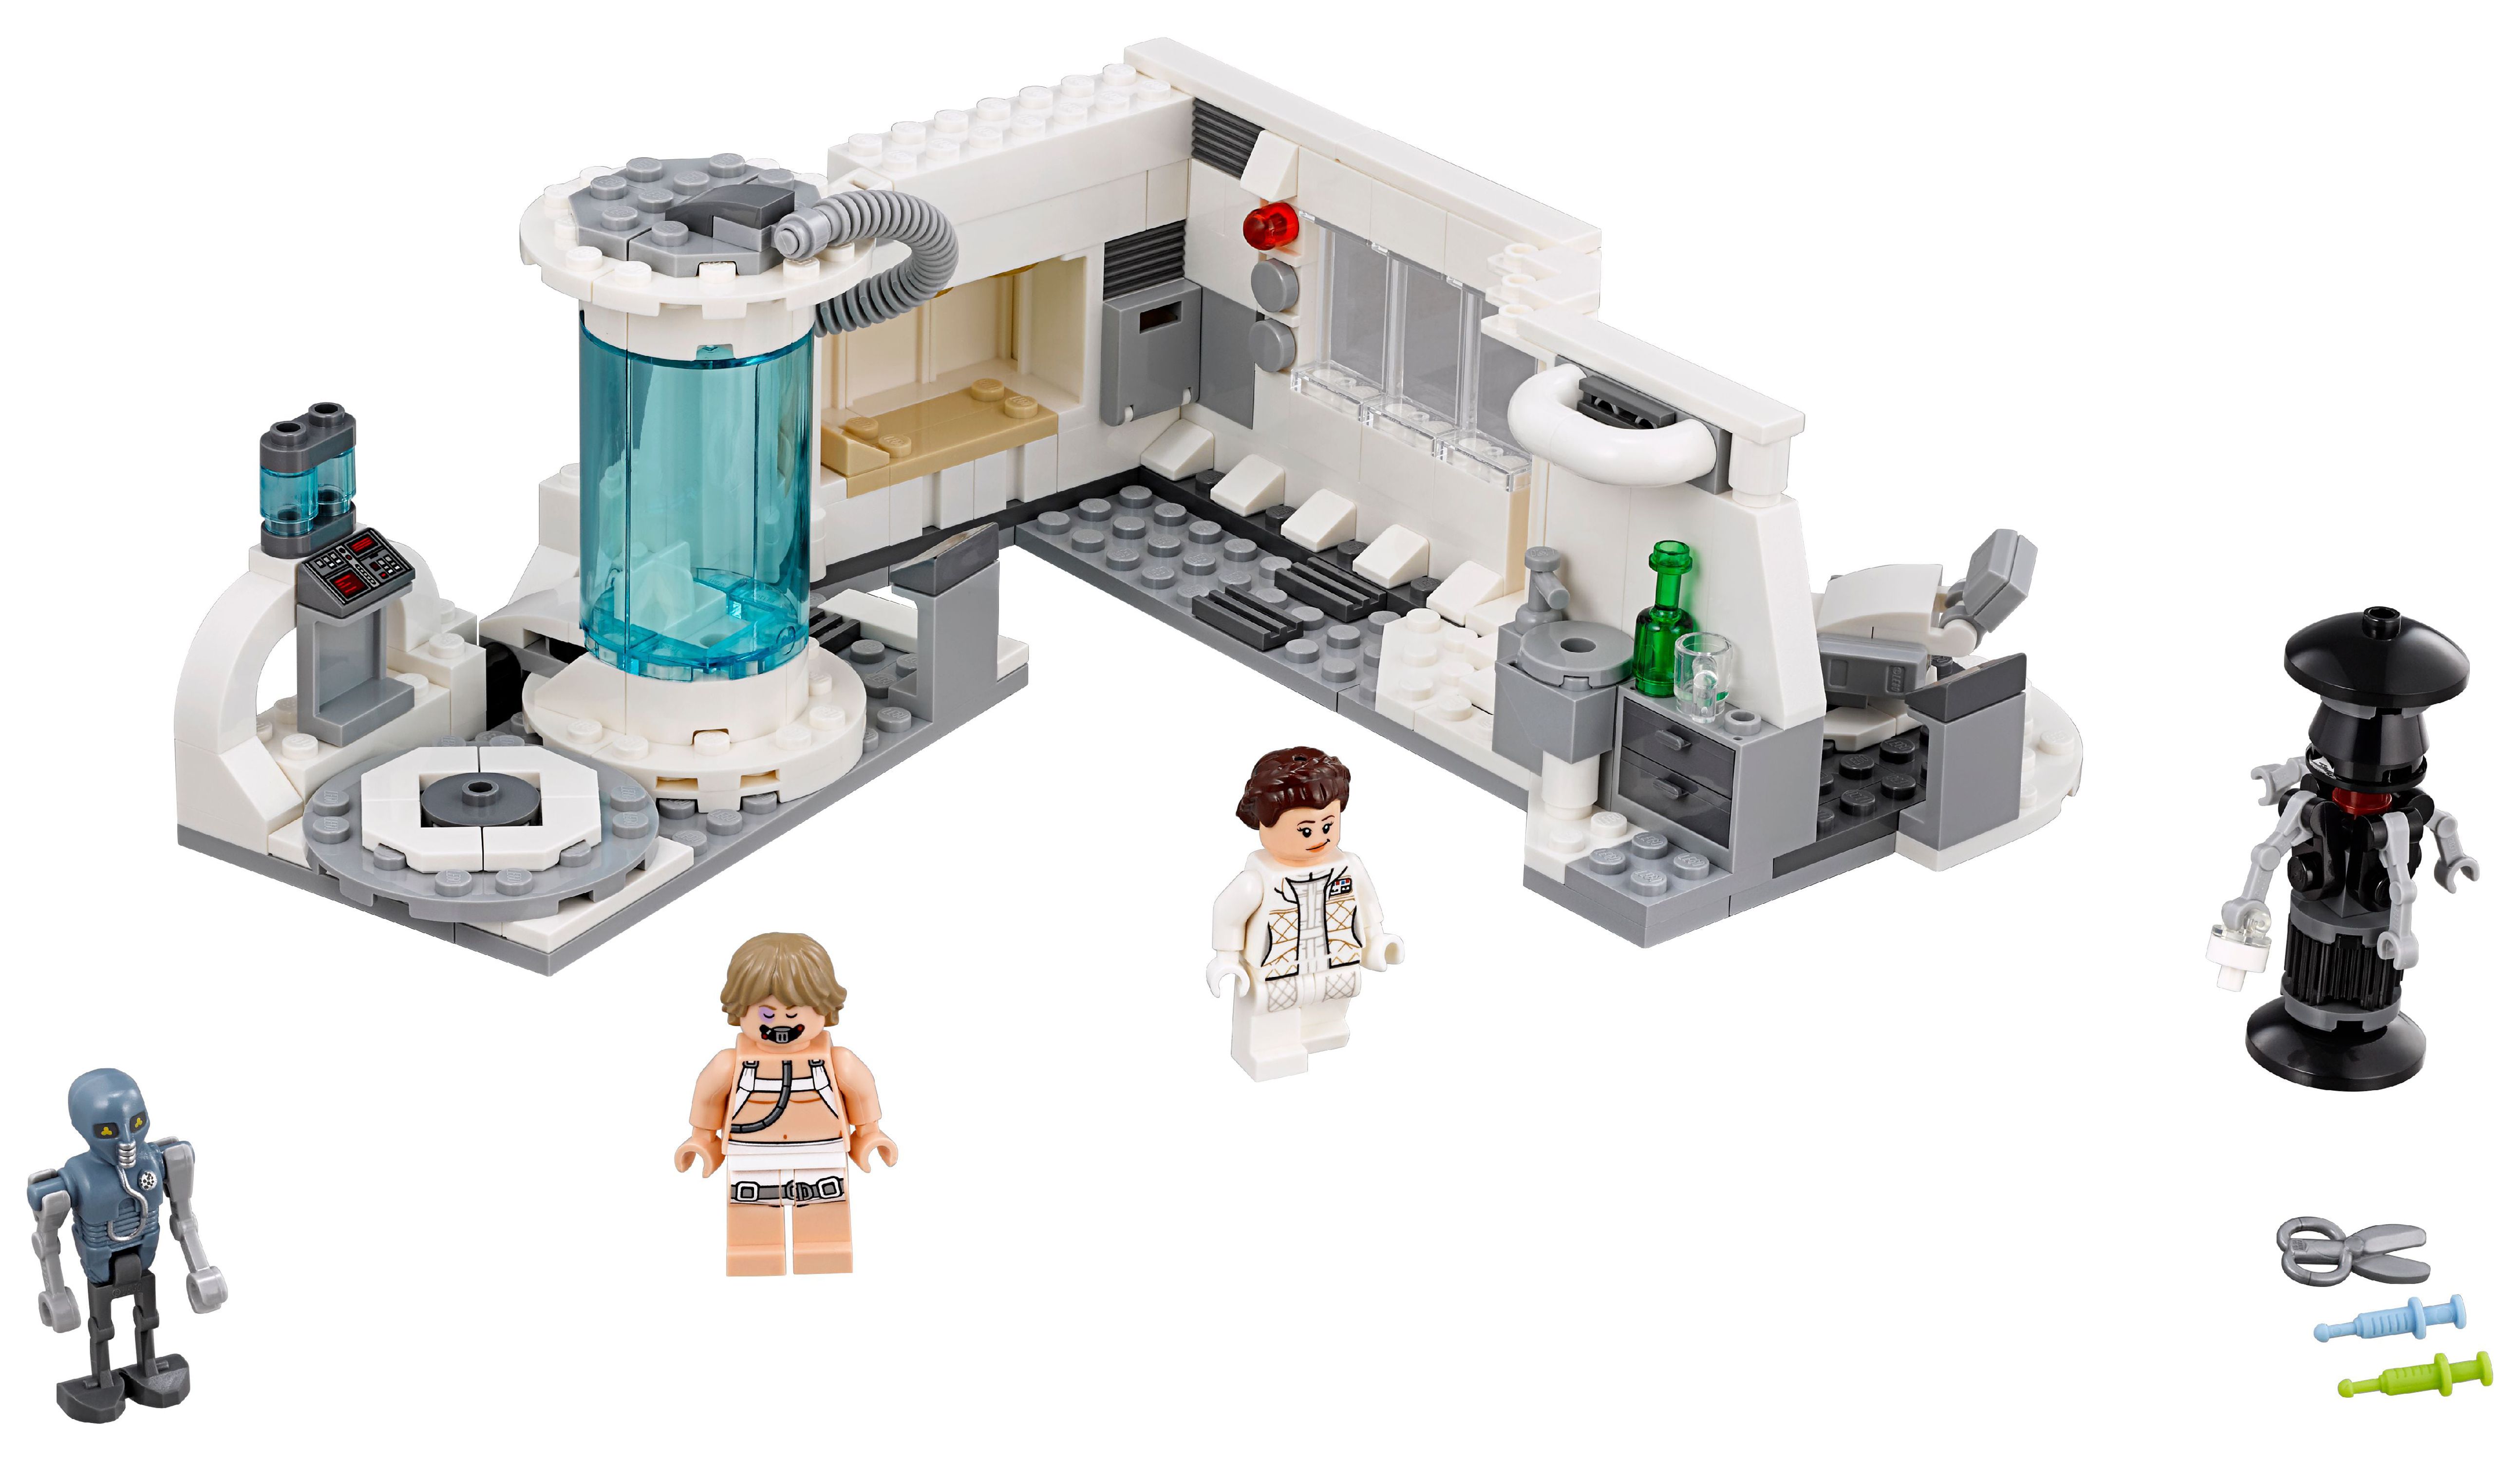 LEGO Star Wars Tm Hoth, Medical Chamber 75203 - image 3 of 8